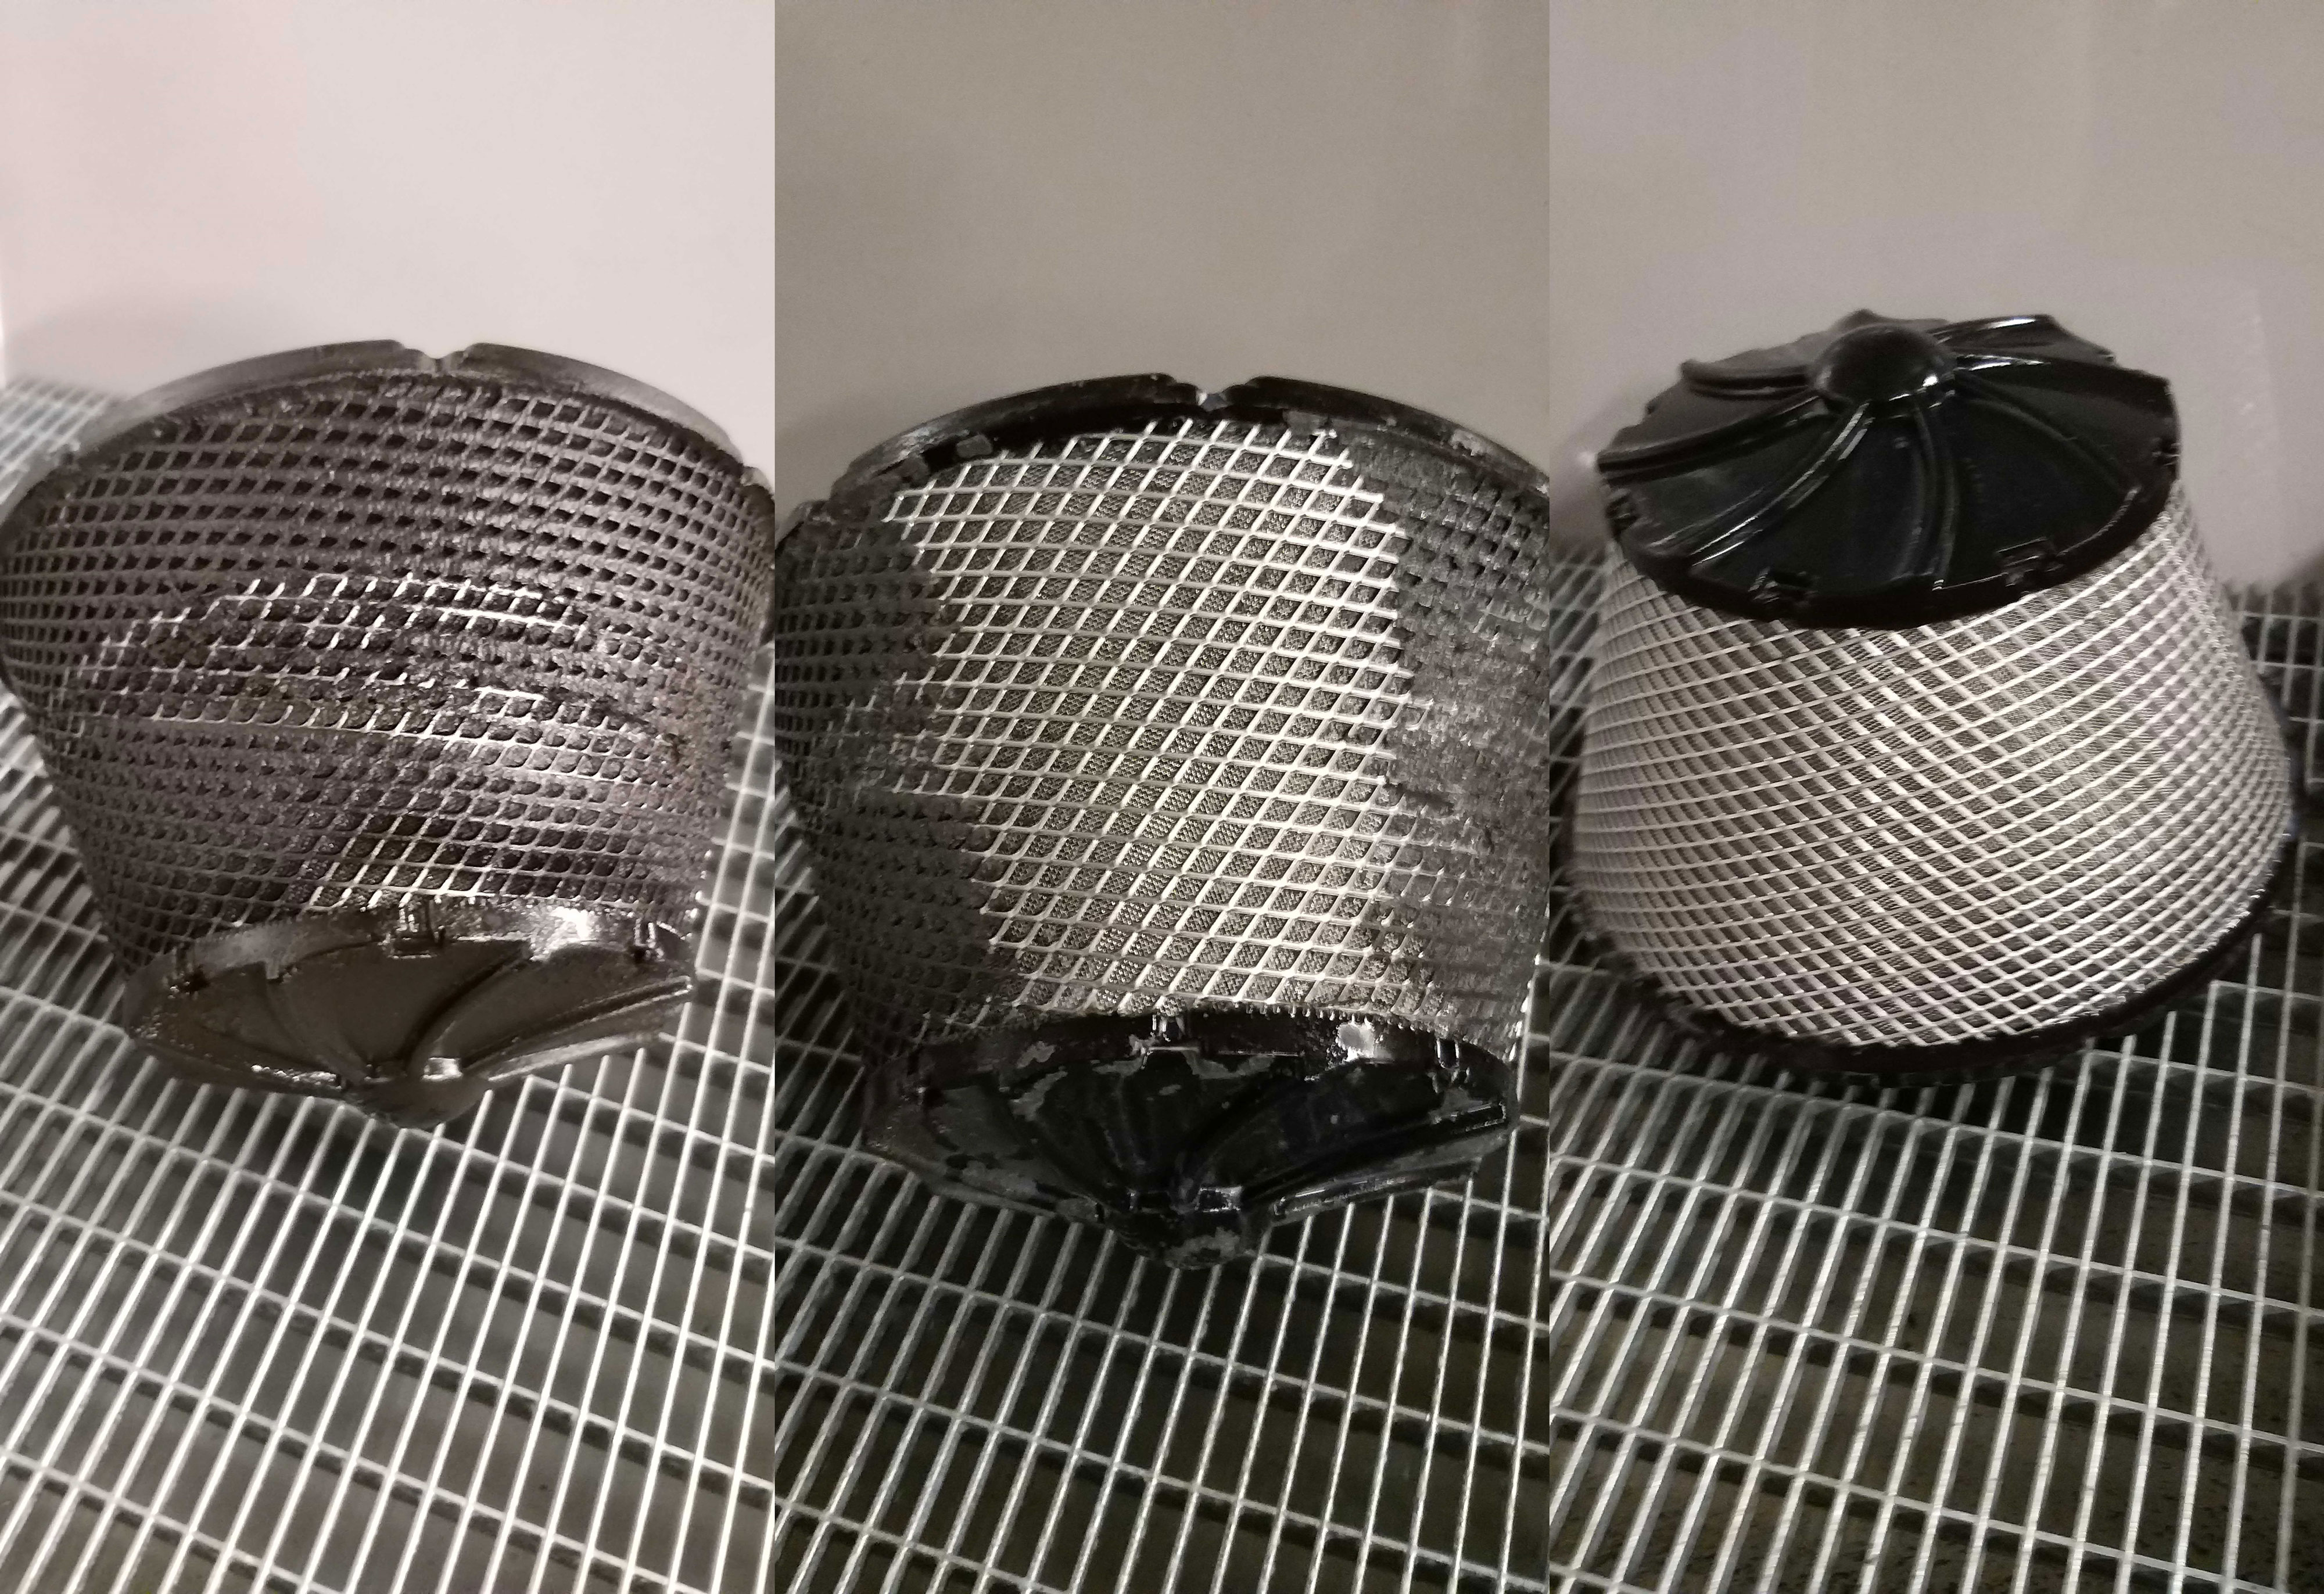 The example of a conical filter: Parts cleaning with low pressure hot cleaner – before and after in a minimal time span